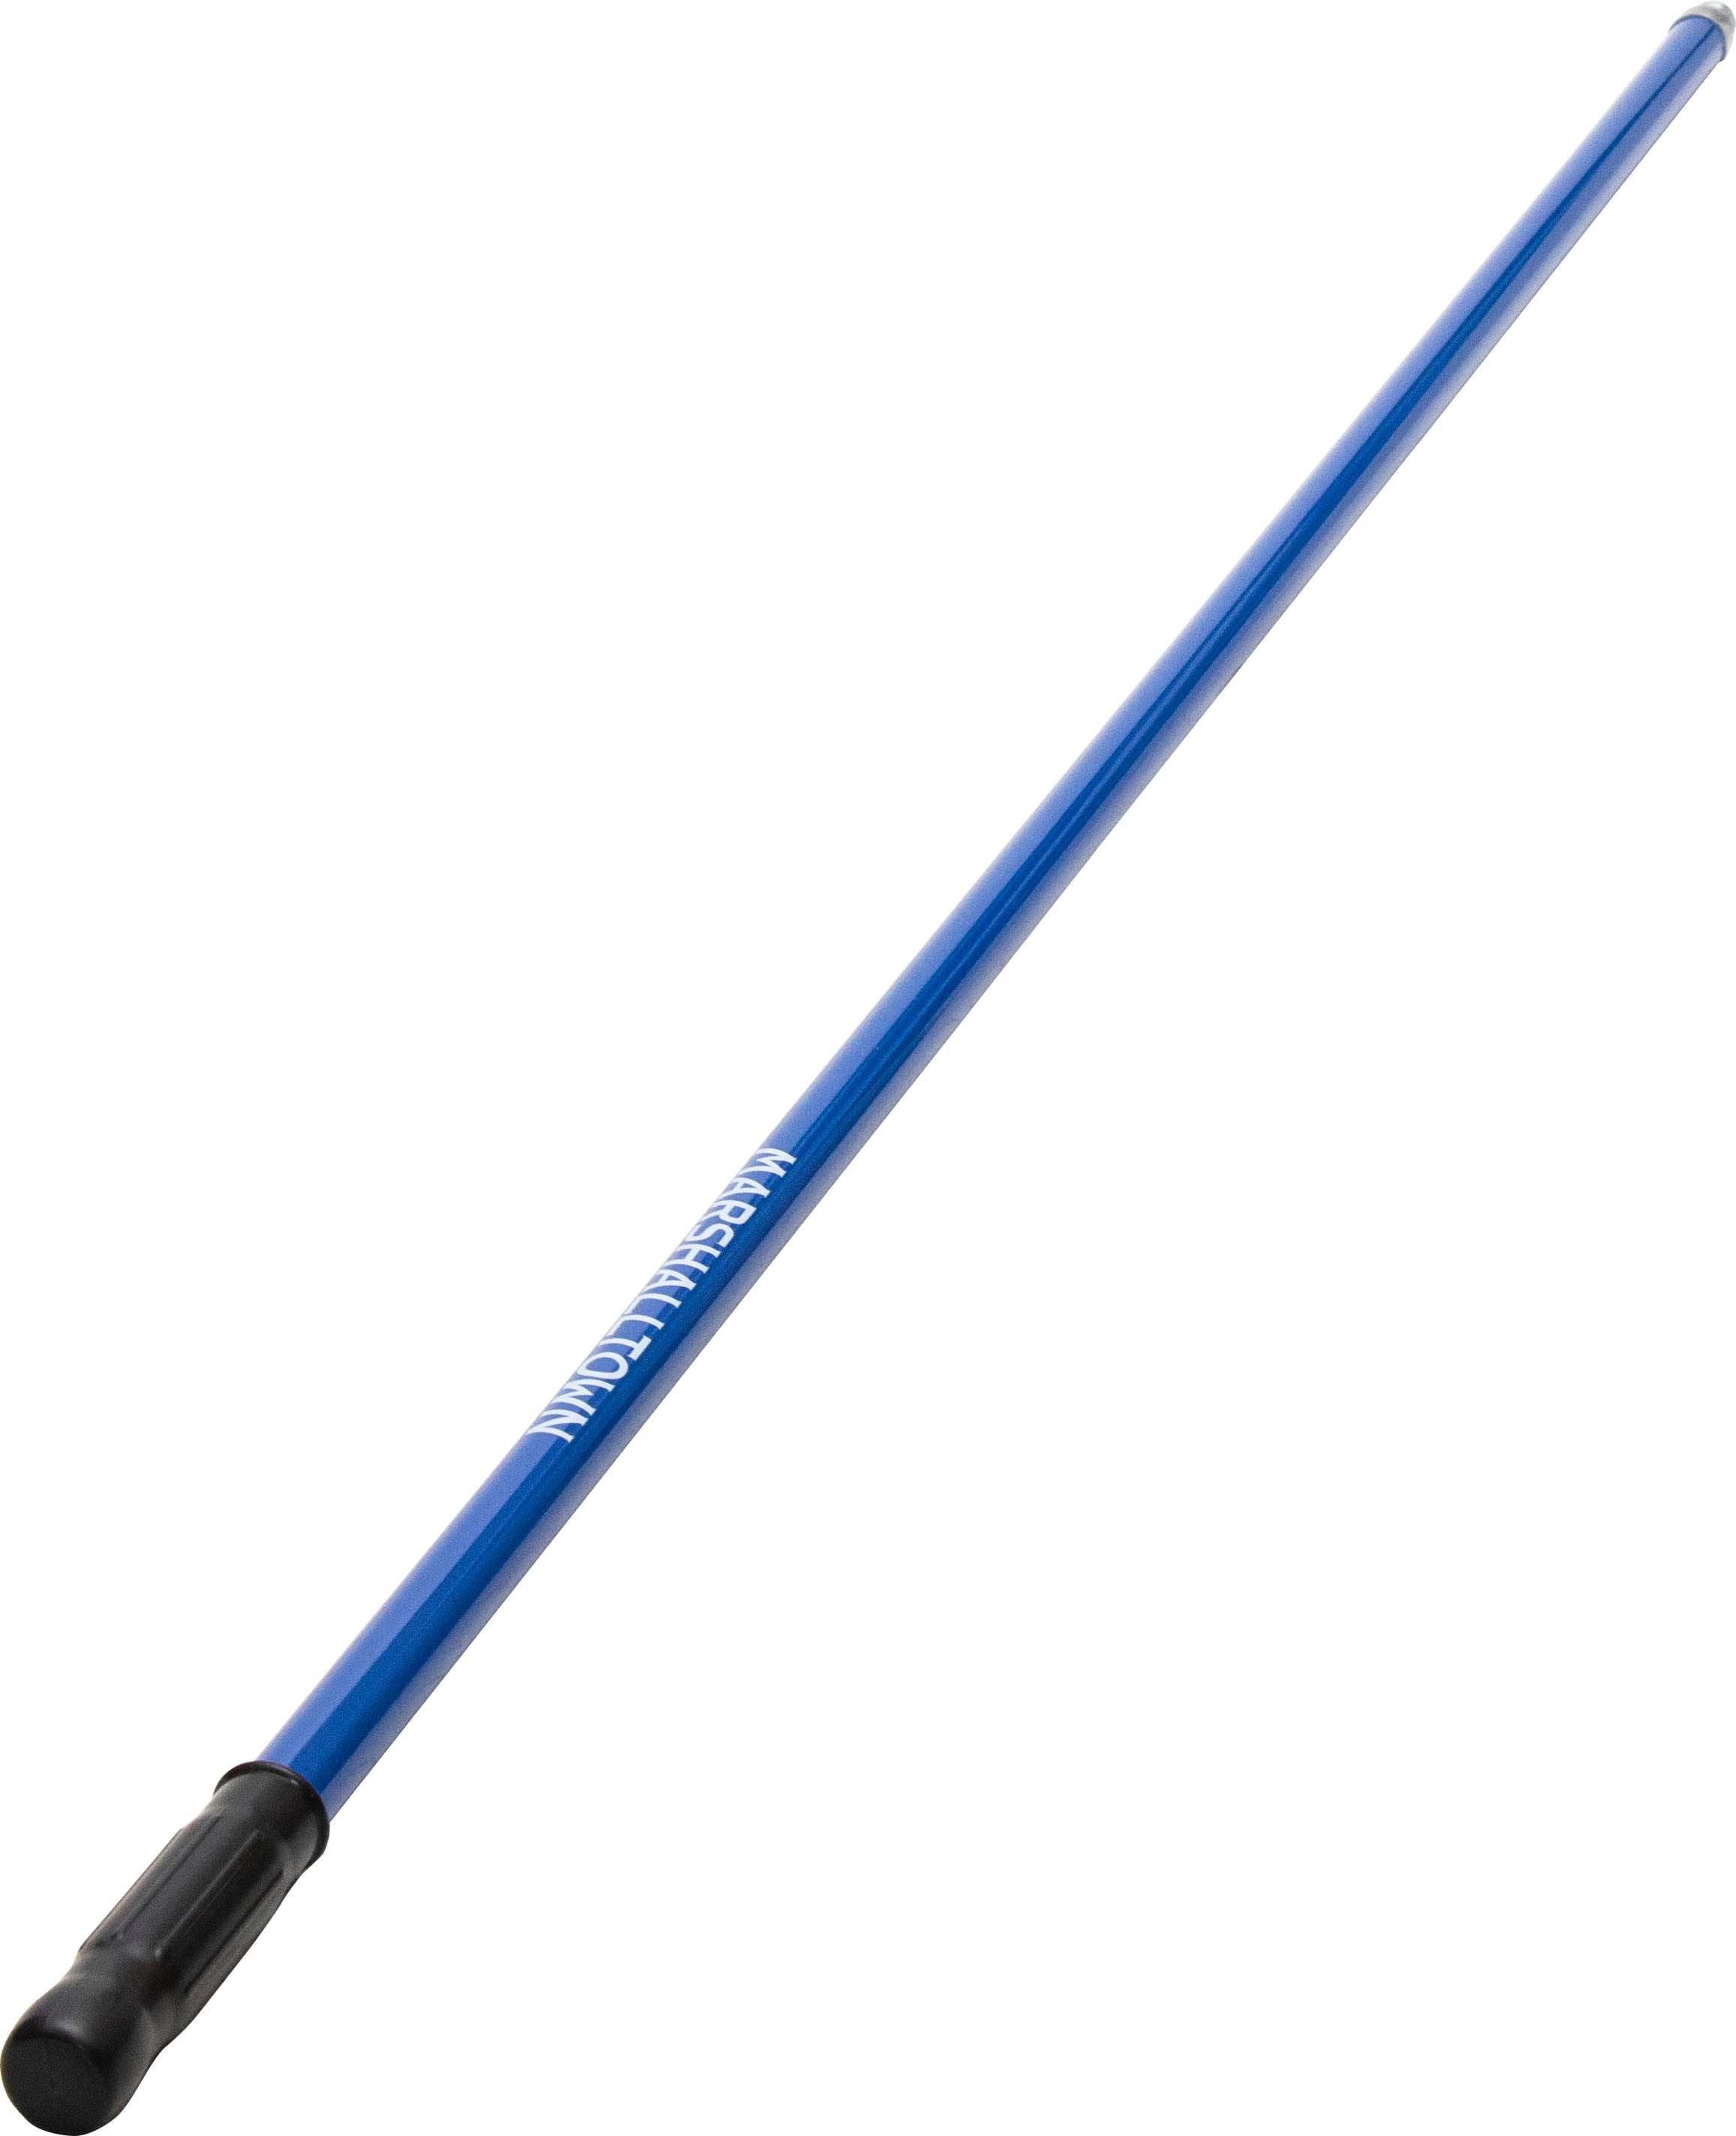 7-30 ft Long Telescopic Extension Pole // Multi-Purpose Extendable Pole  with Universal Twist-on Metal Tip // Lightweight and Sturdy // Best